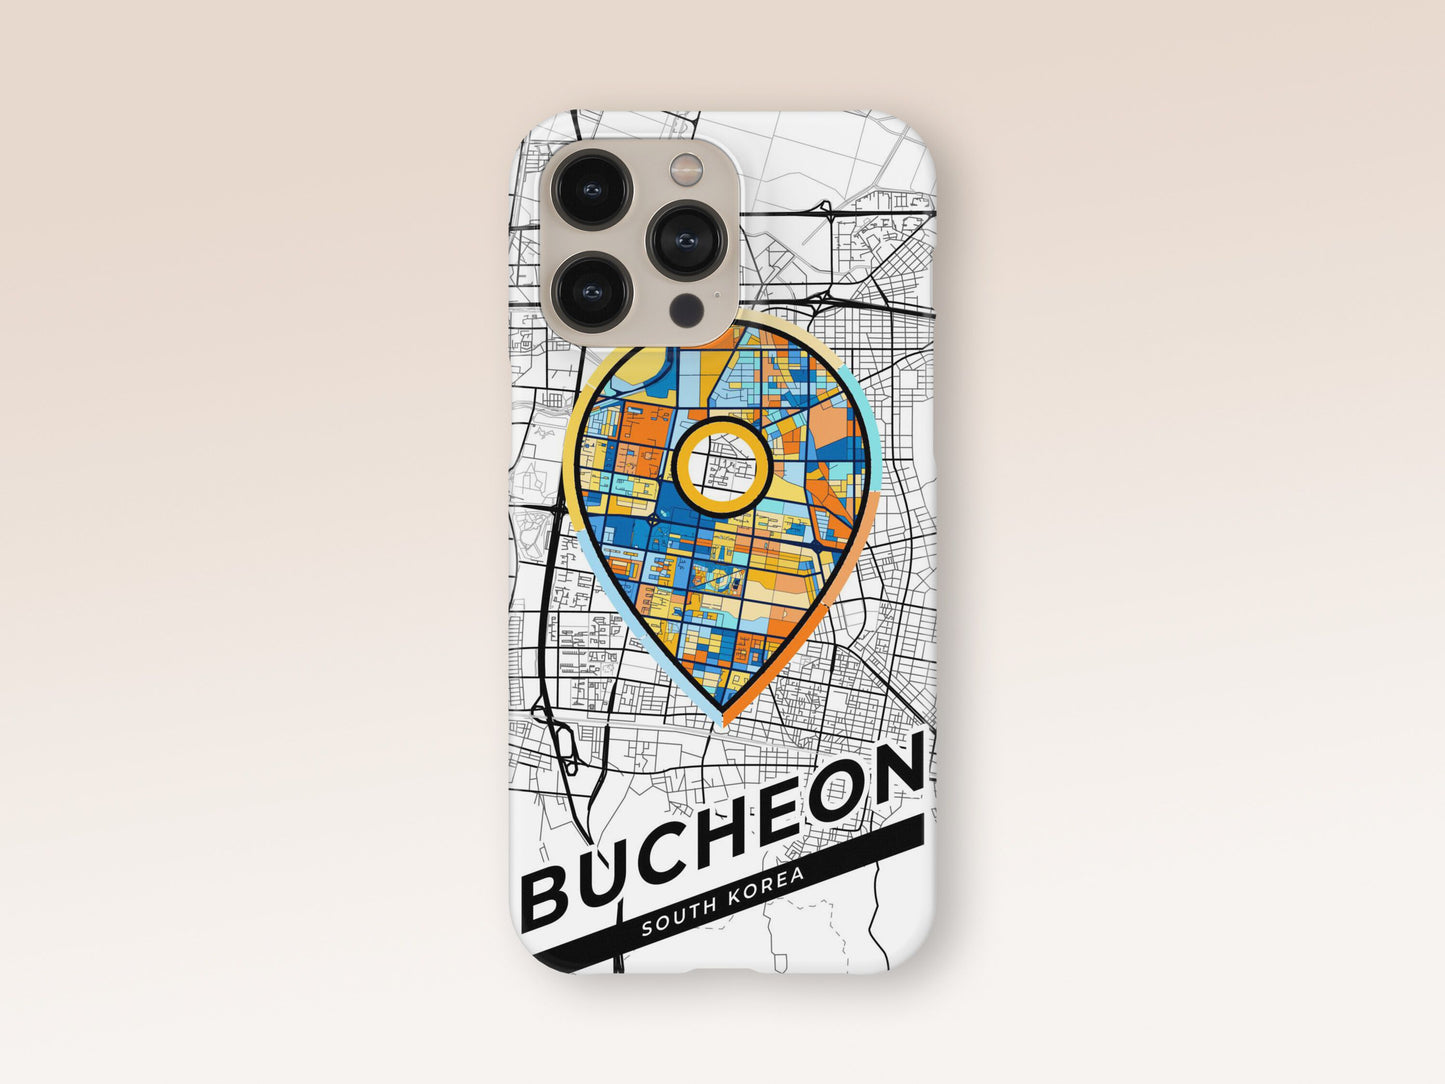 Bucheon South Korea slim phone case with colorful icon. Birthday, wedding or housewarming gift. Couple match cases. 1